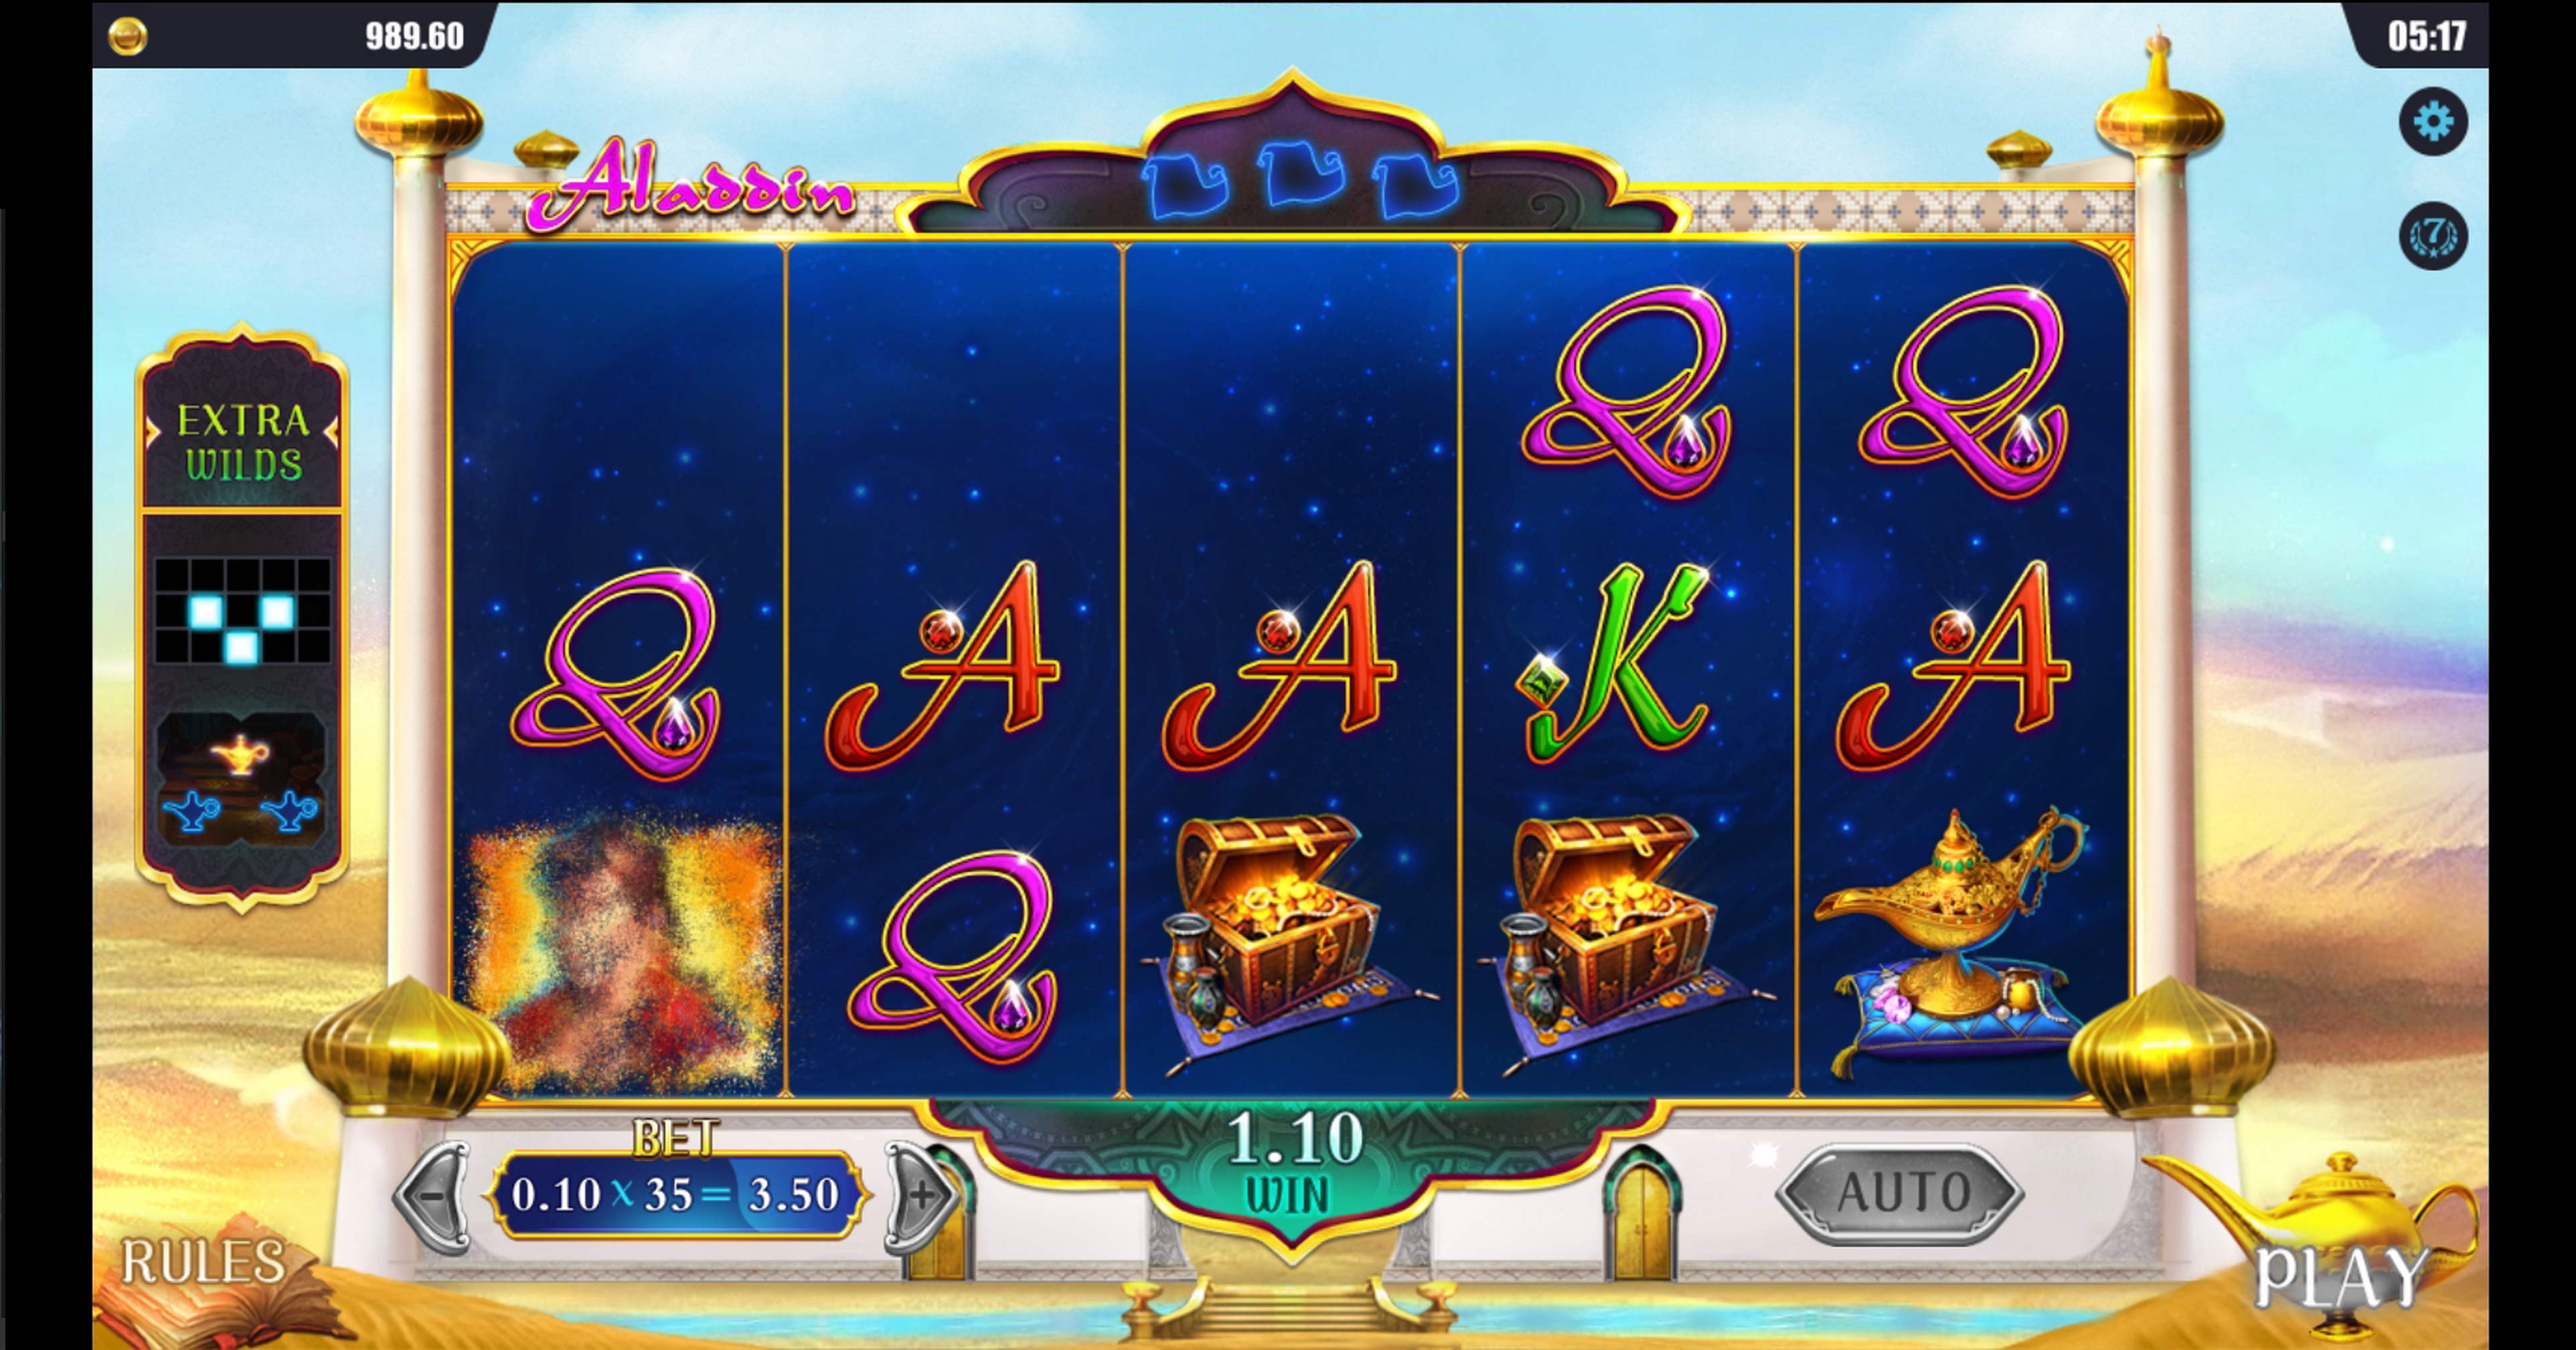 Win Money in Aladdins Wish Free Slot Game by Dreamtech Gaming